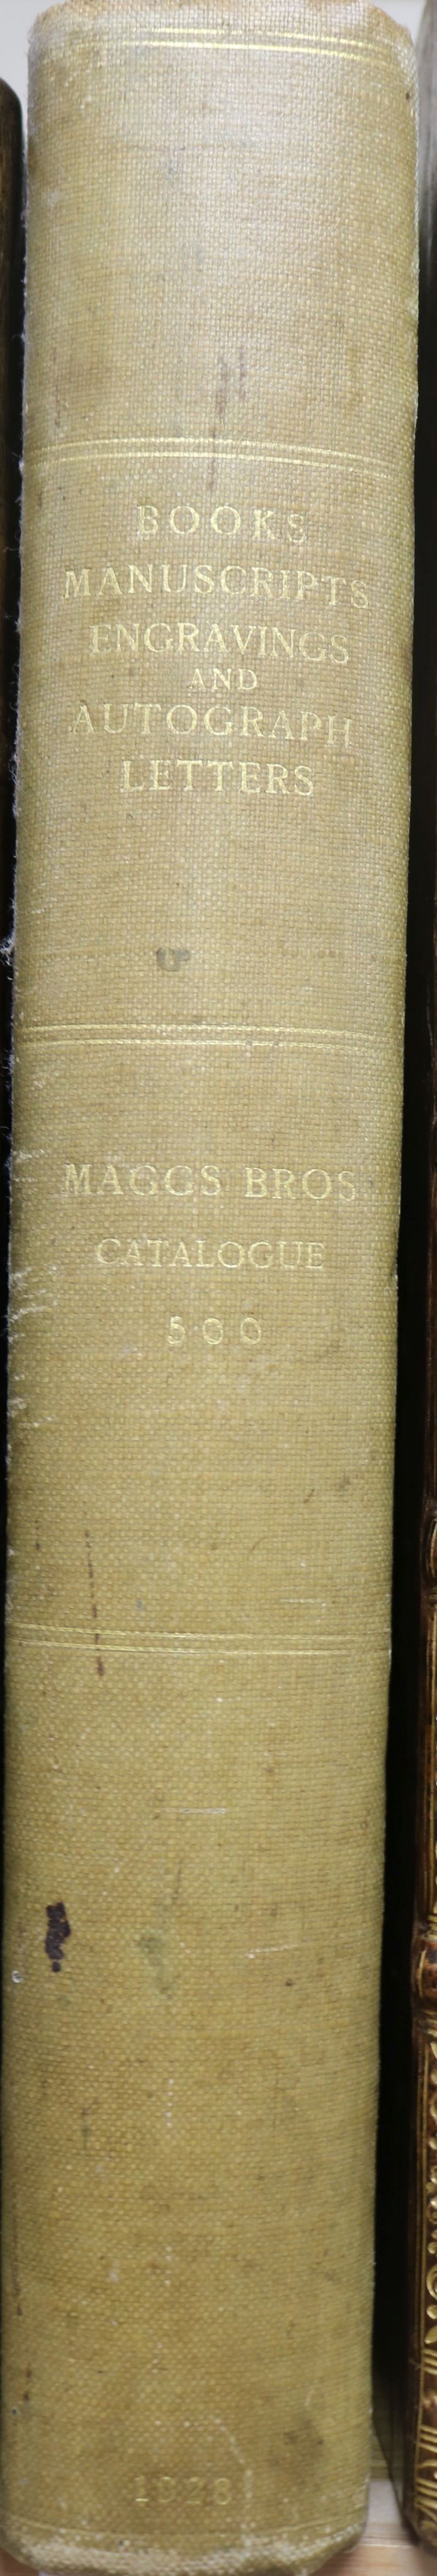 Maggs Bros Catalogue - A selection of books, manuscripts, engravings and autograph letters,